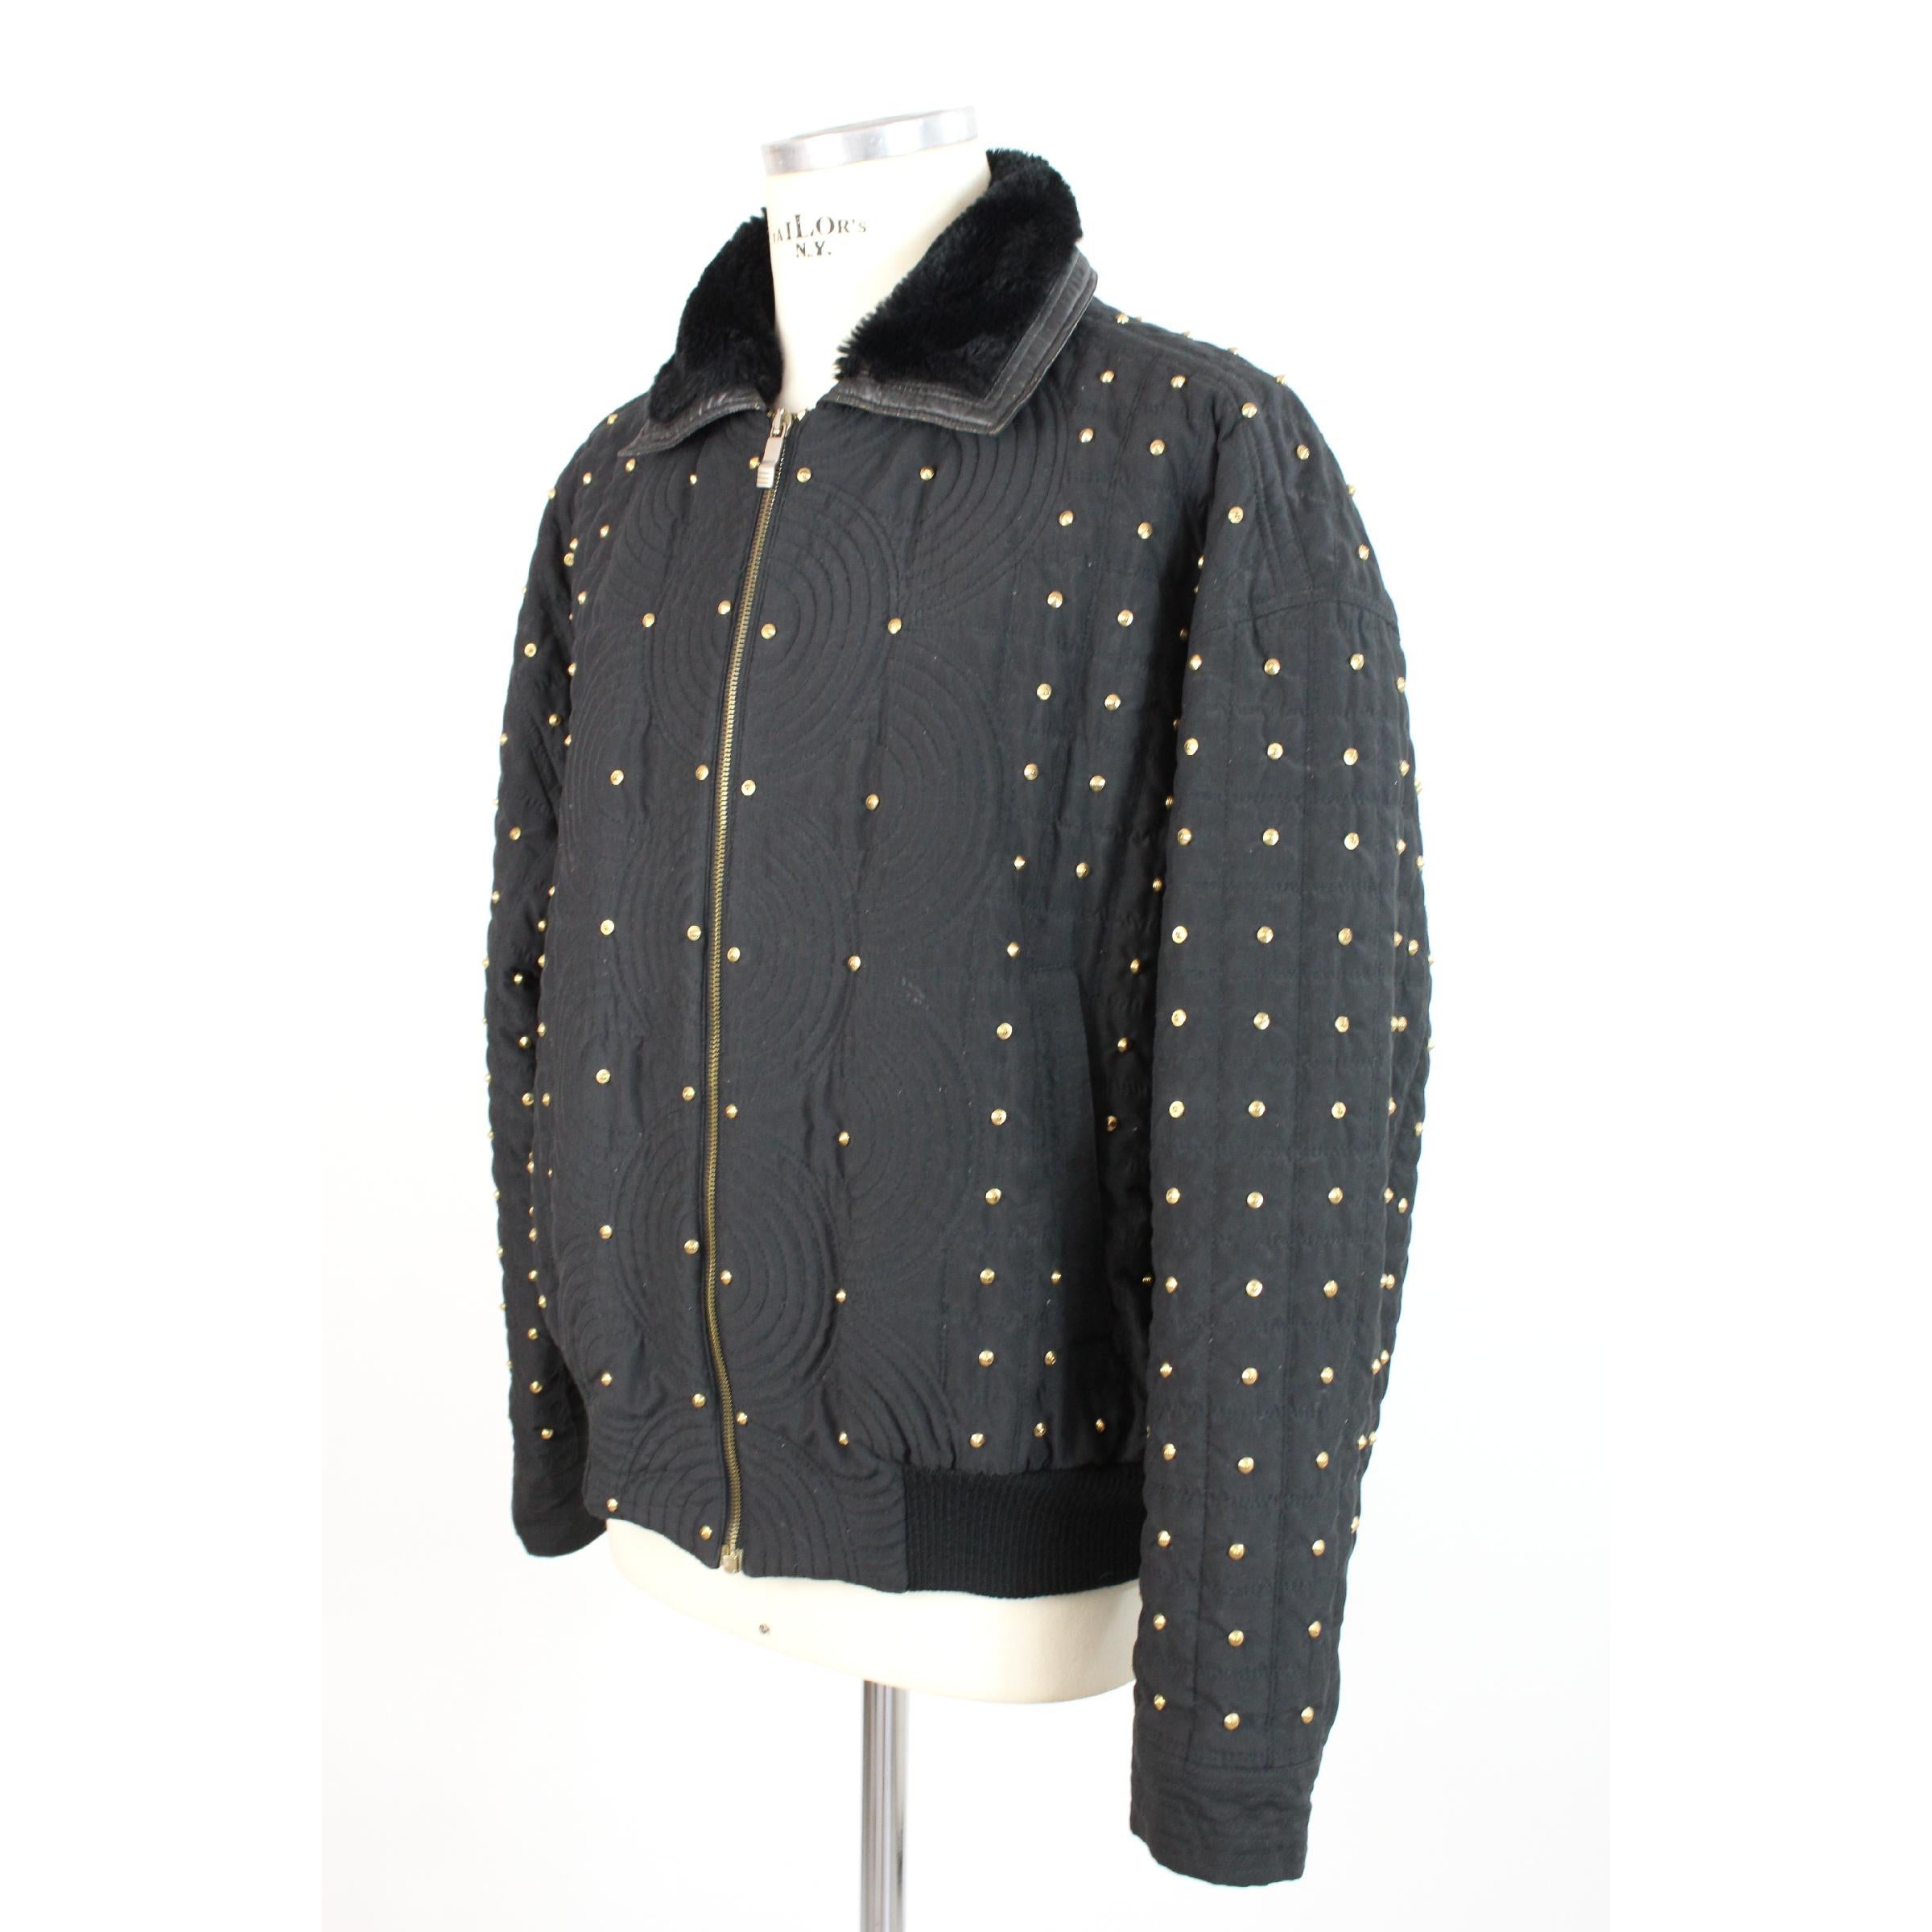 Vintage men's jacket Versus by Gianni Versace. Black color with golden studs, faux fur collar and leather edging, zip closure. Fabric 85% polyester 8% acrylic 4% wool 3% cotton. Made in Italy. Excellent vintage conditions.

Size: 54 It 44 Us 44